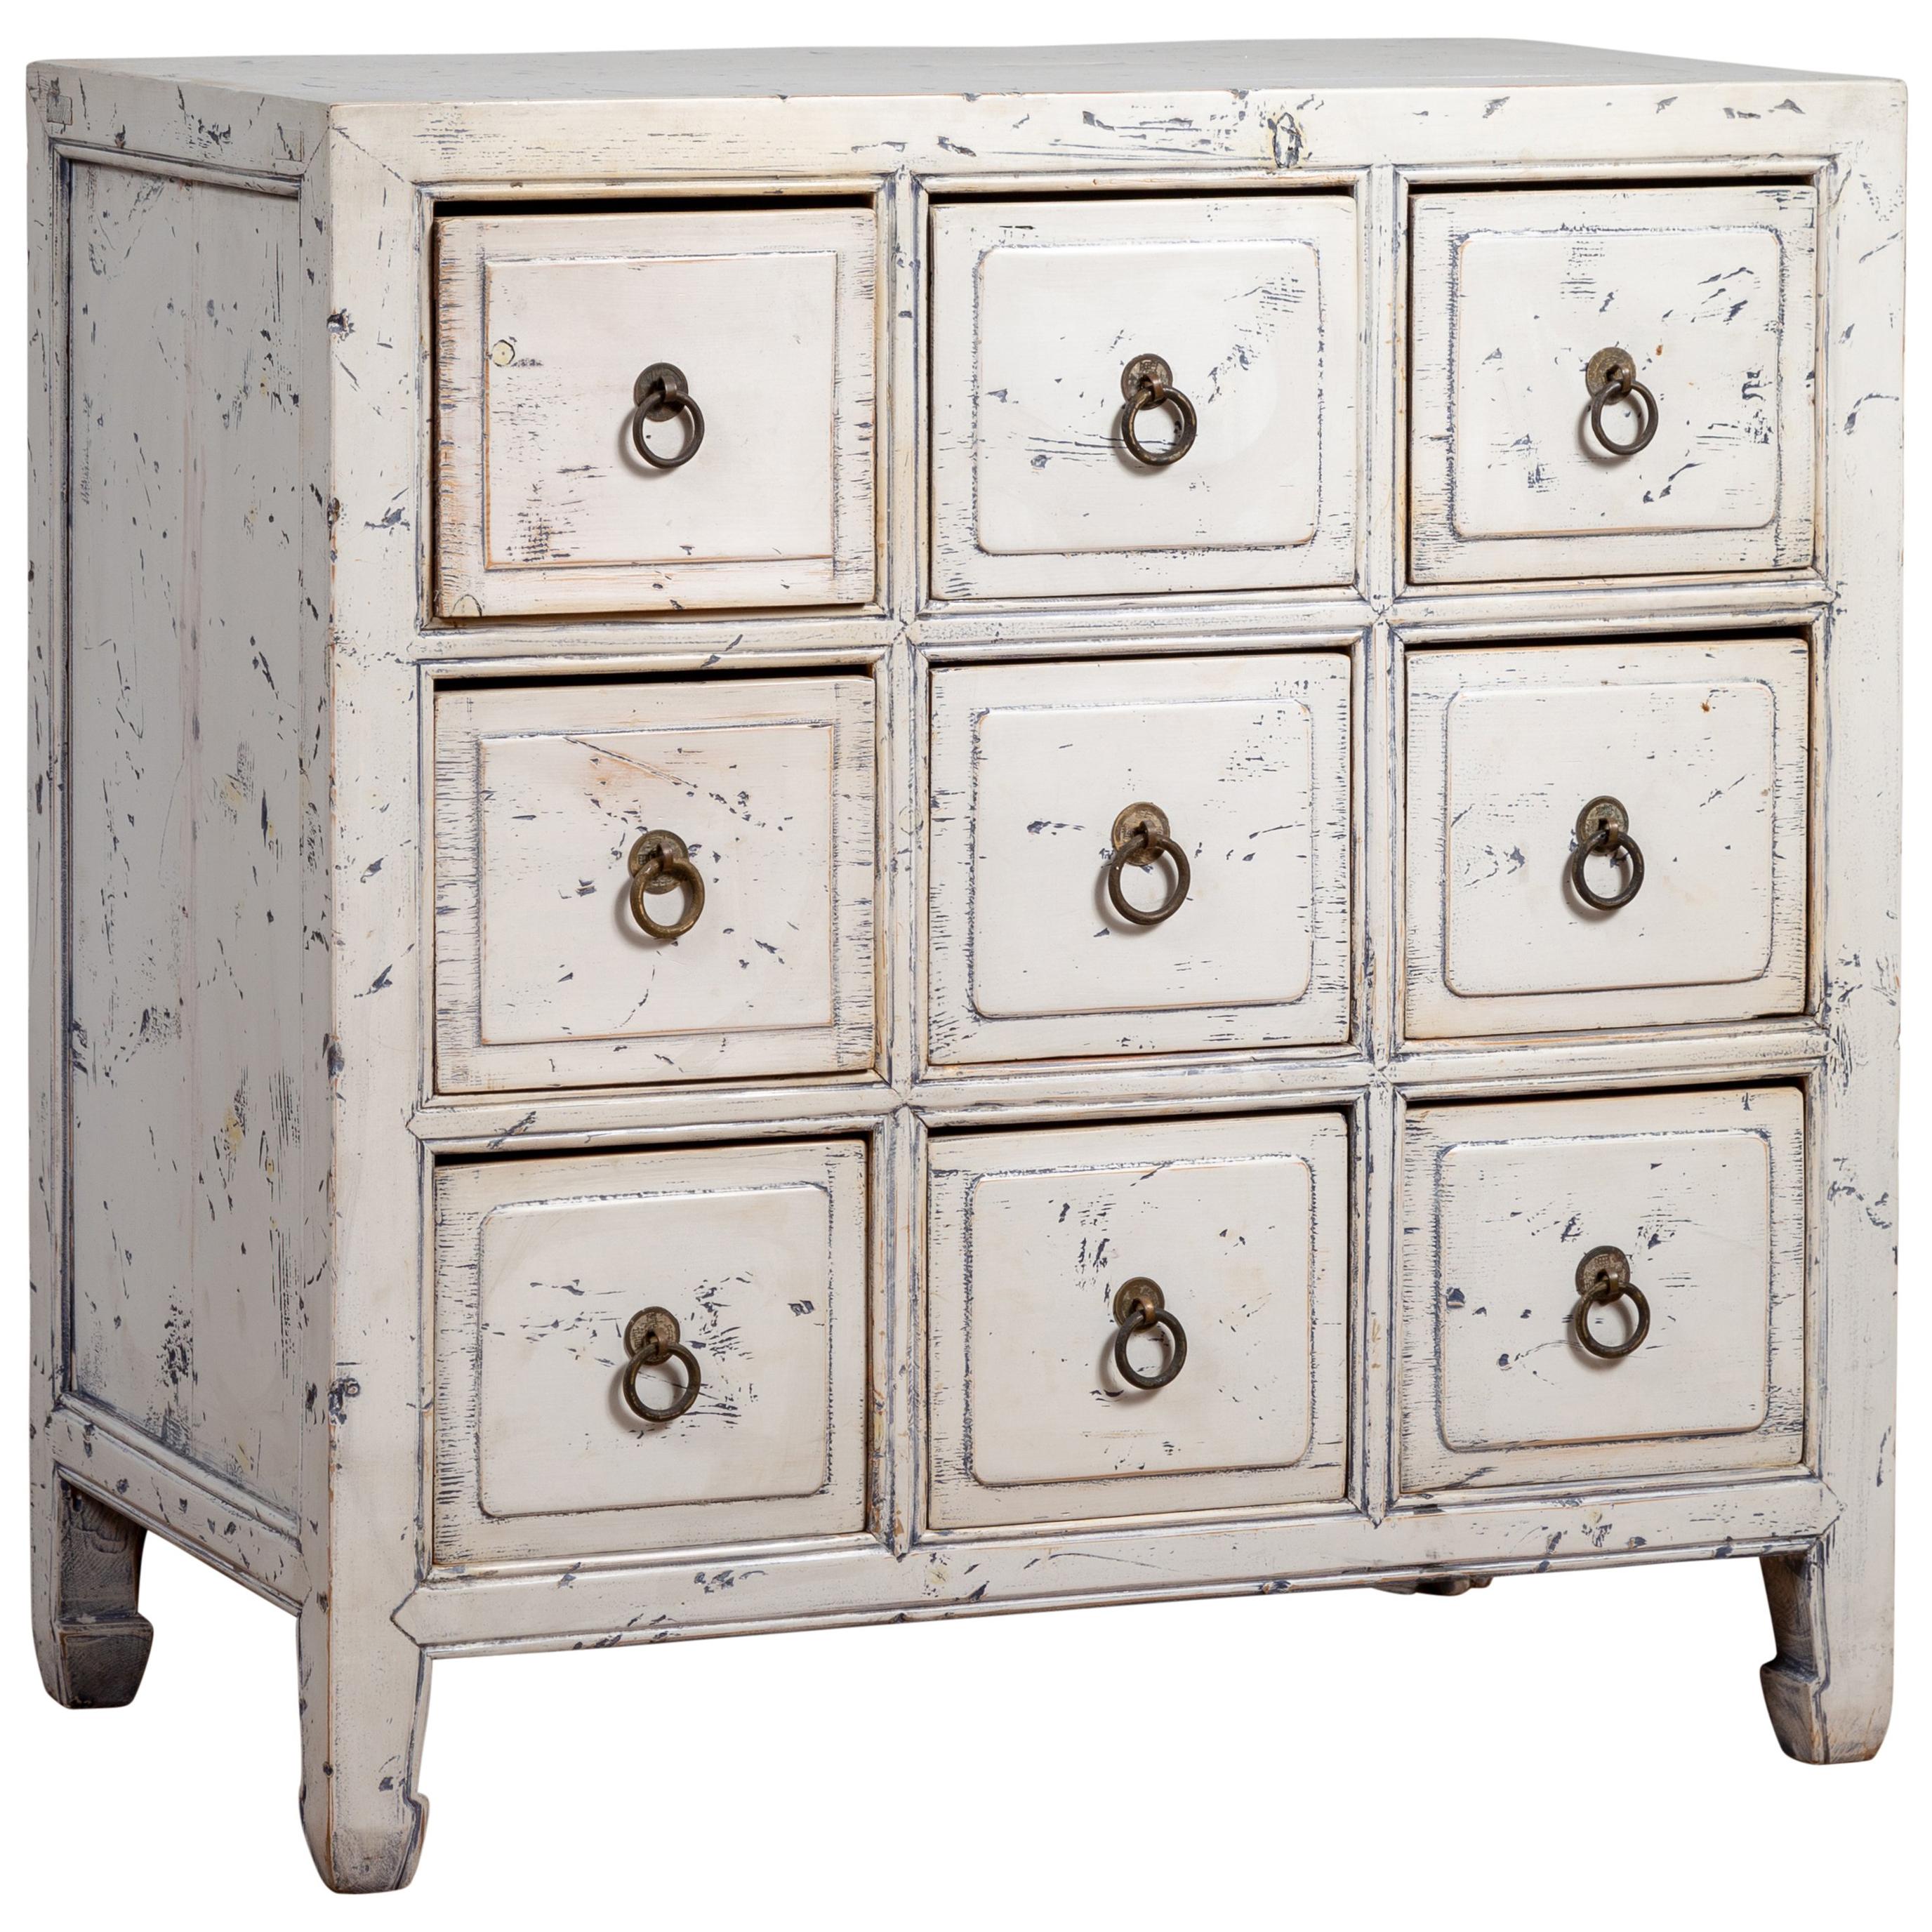 Chinese 1950s White Painted Nine-Drawer Apothecary Chest with Distressed Finish